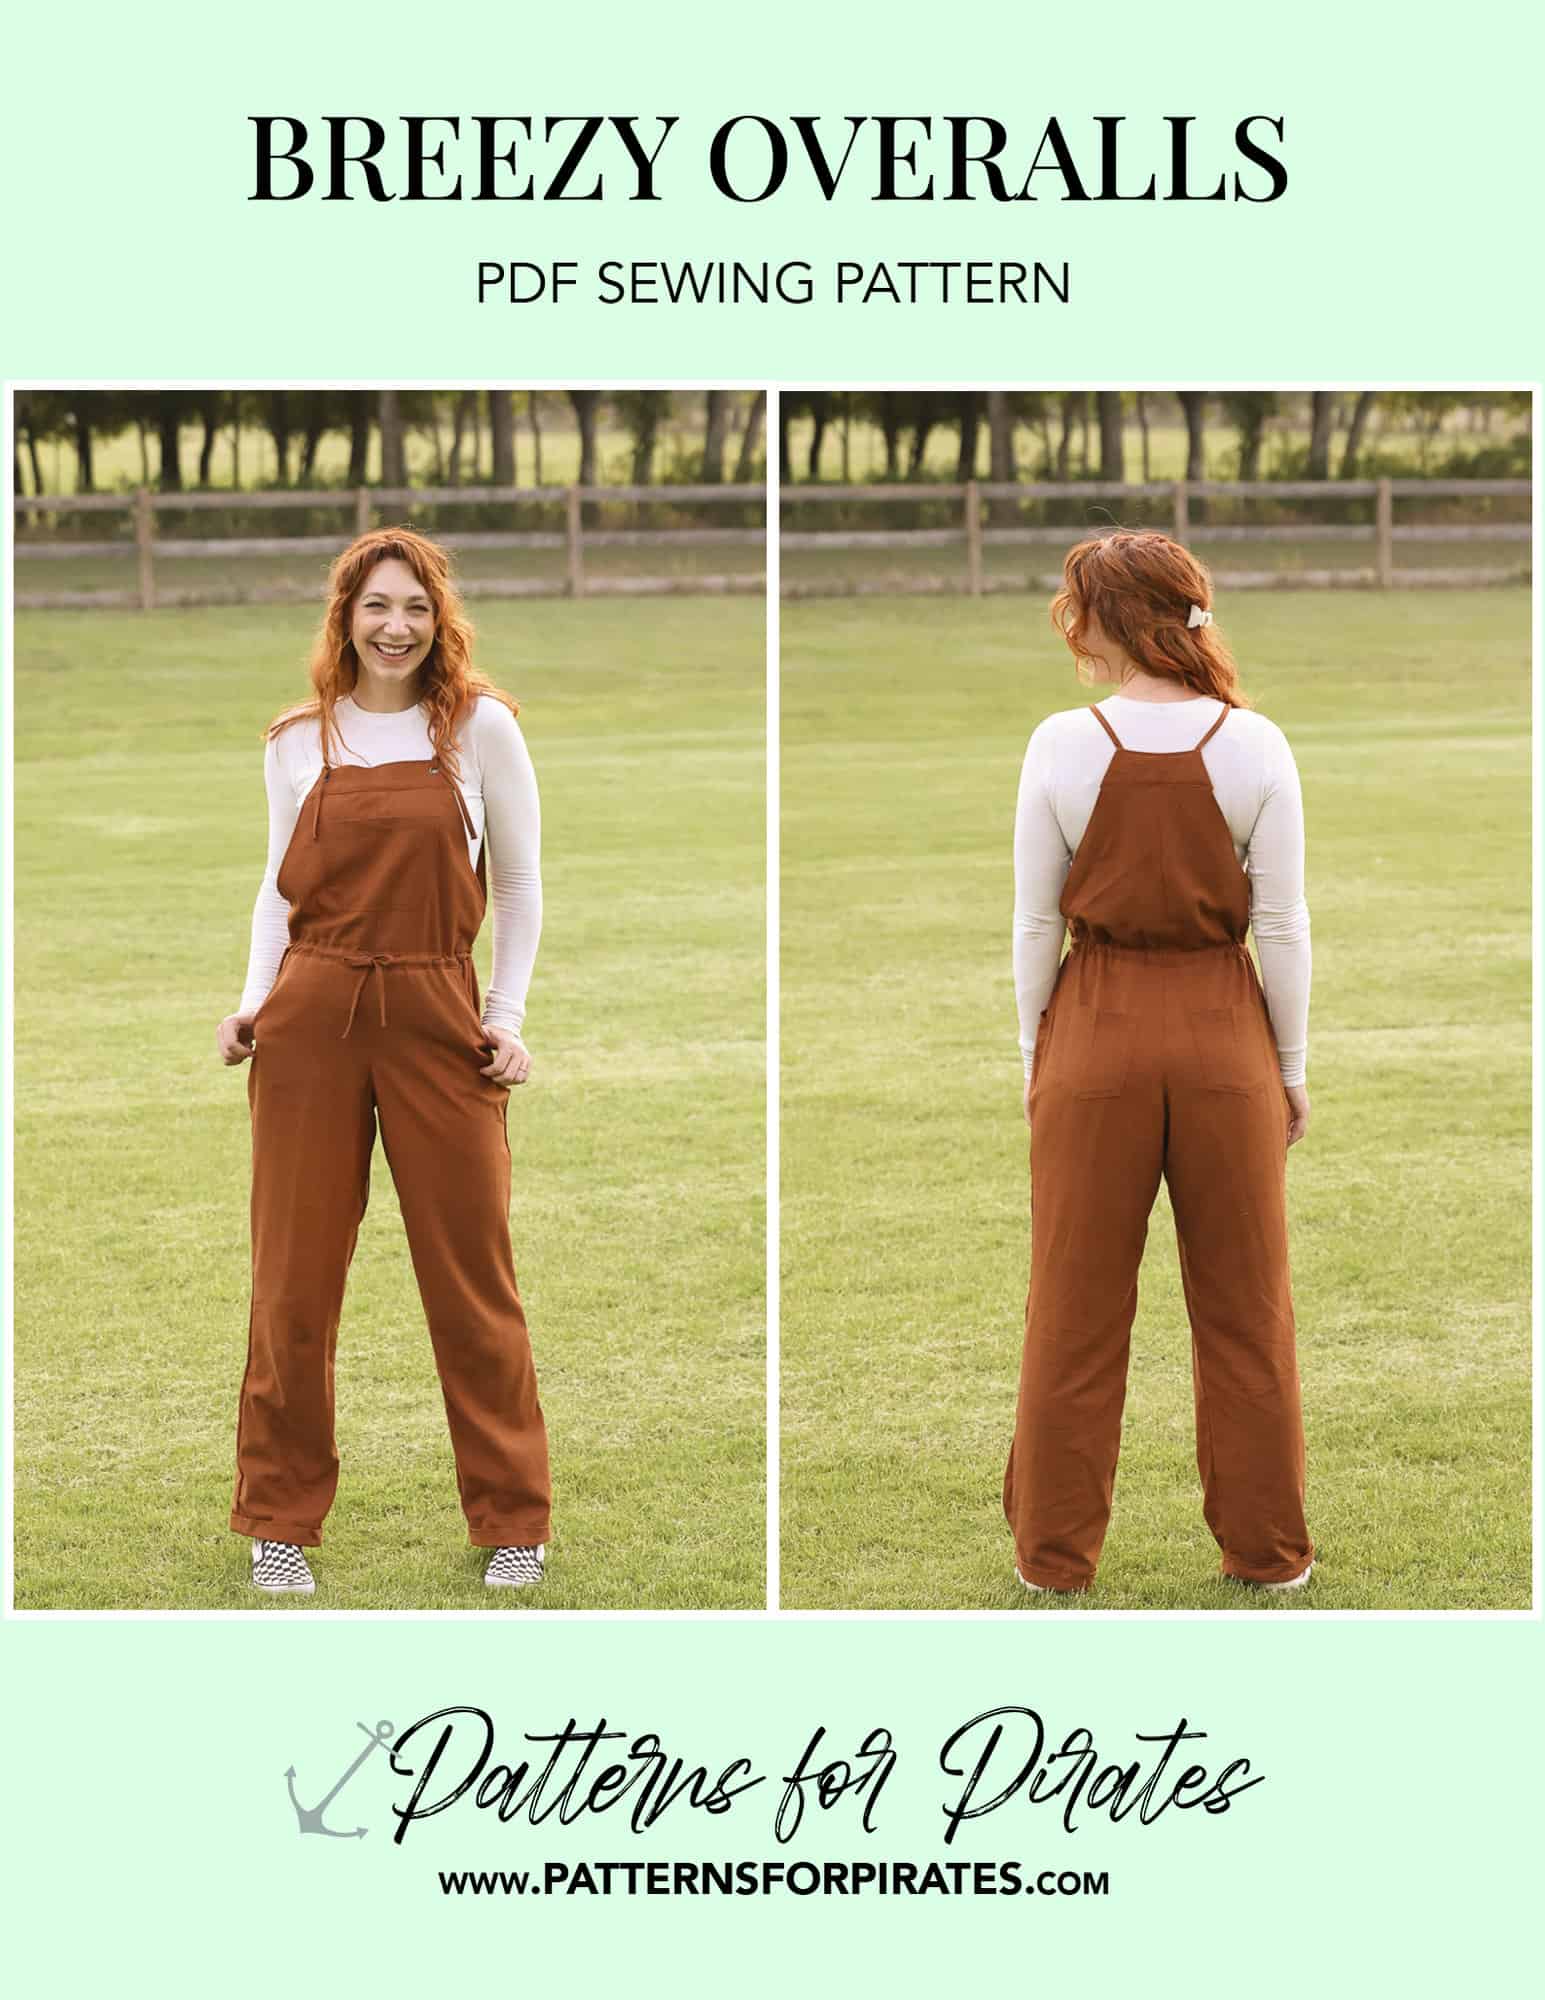 Breezy Overalls - Patterns for Pirates